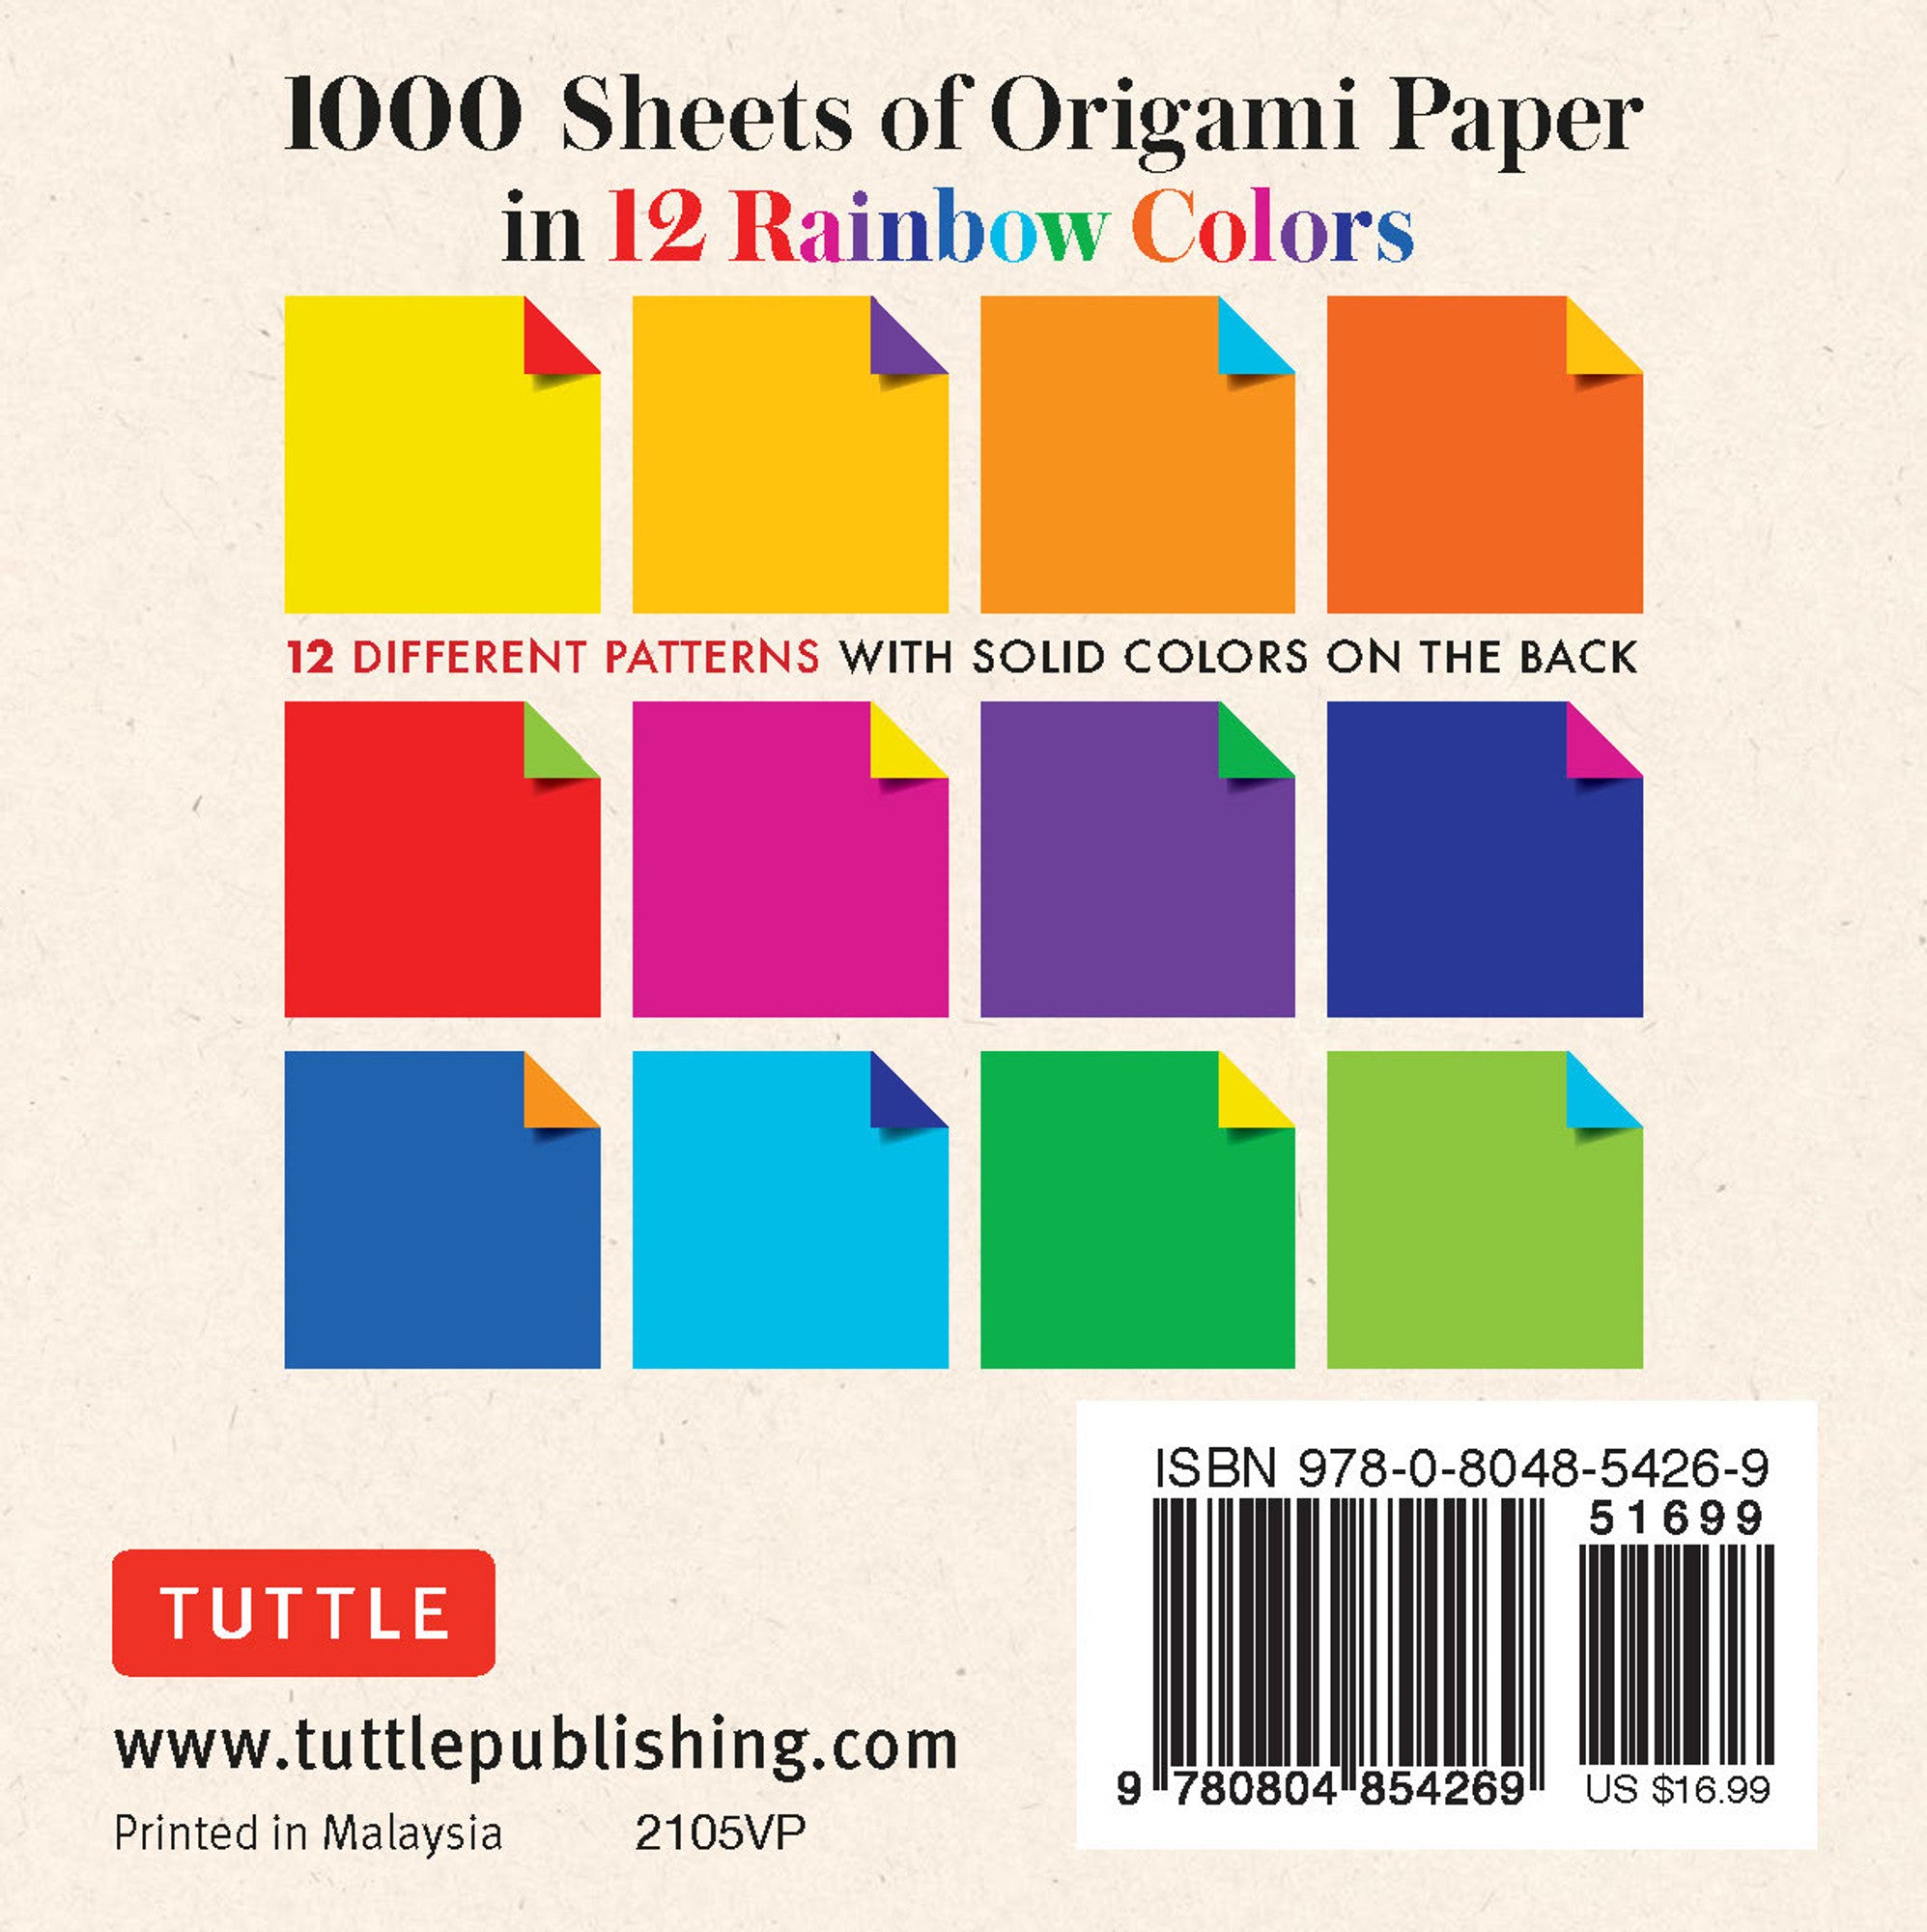 1000 sheets 4” Origami Paper Rainbow Colors